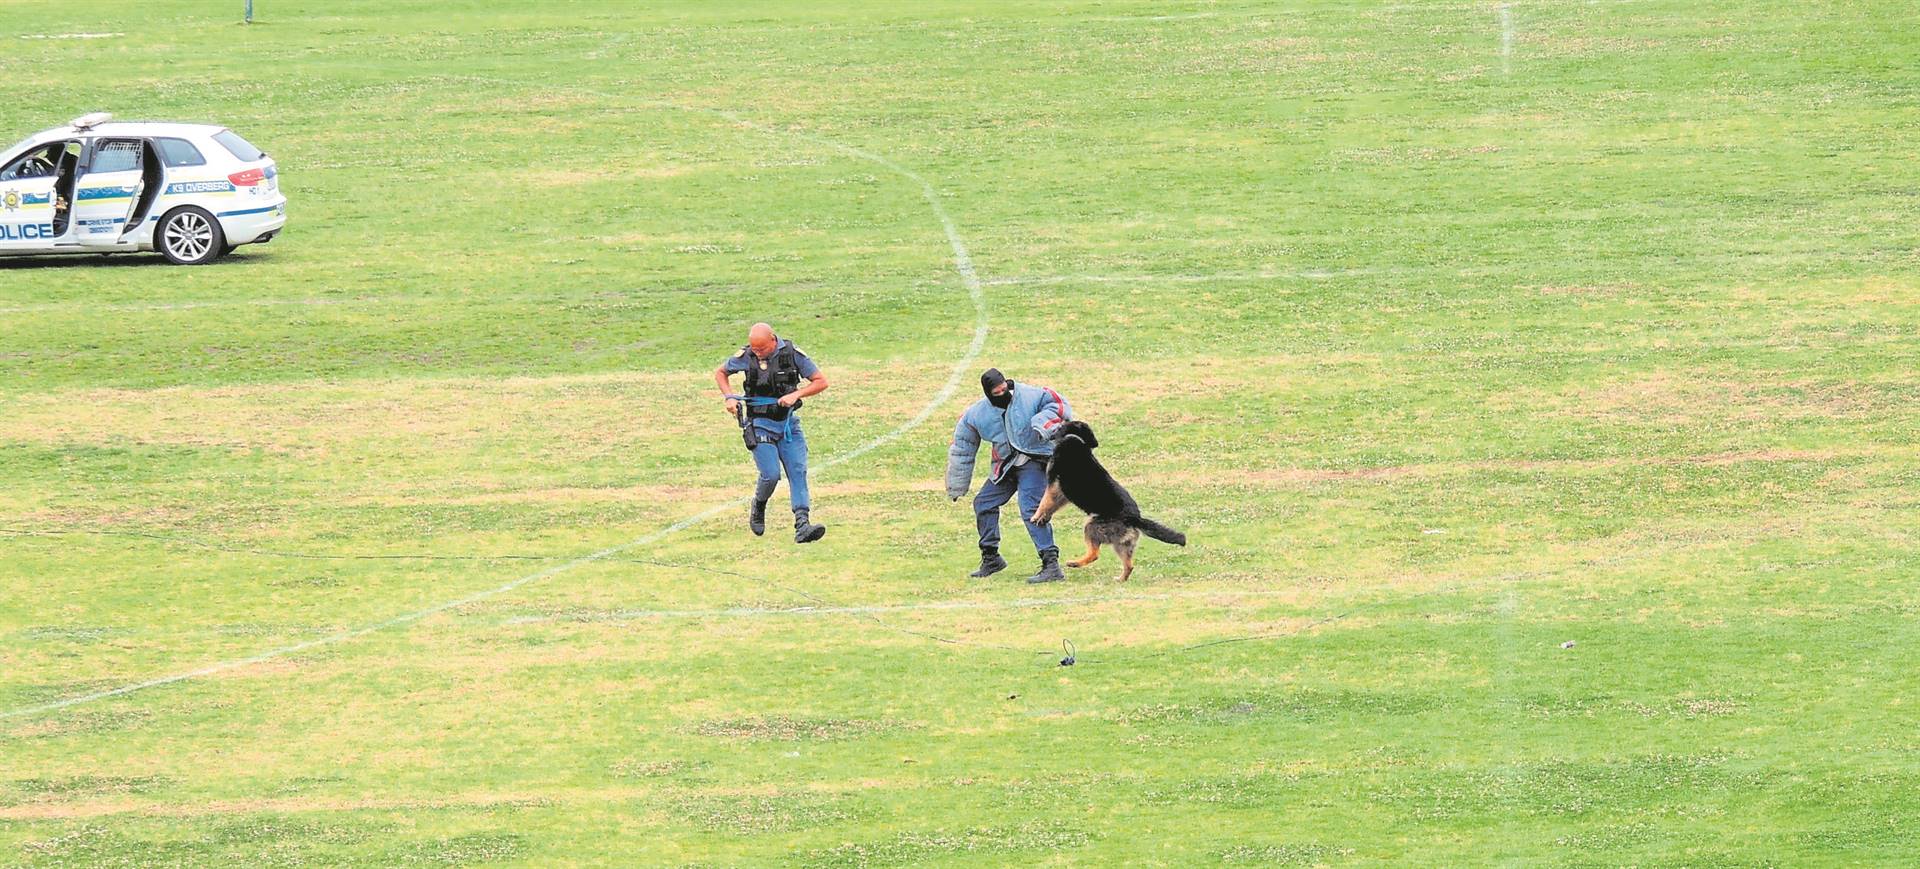 Sgt Eslin Johnson and police dog Bismarck of the Hermanus K9 unit show their skills off in apprehending a “thief” during a display at the Holy Trinity Festival.Photo: Mitzi Buys